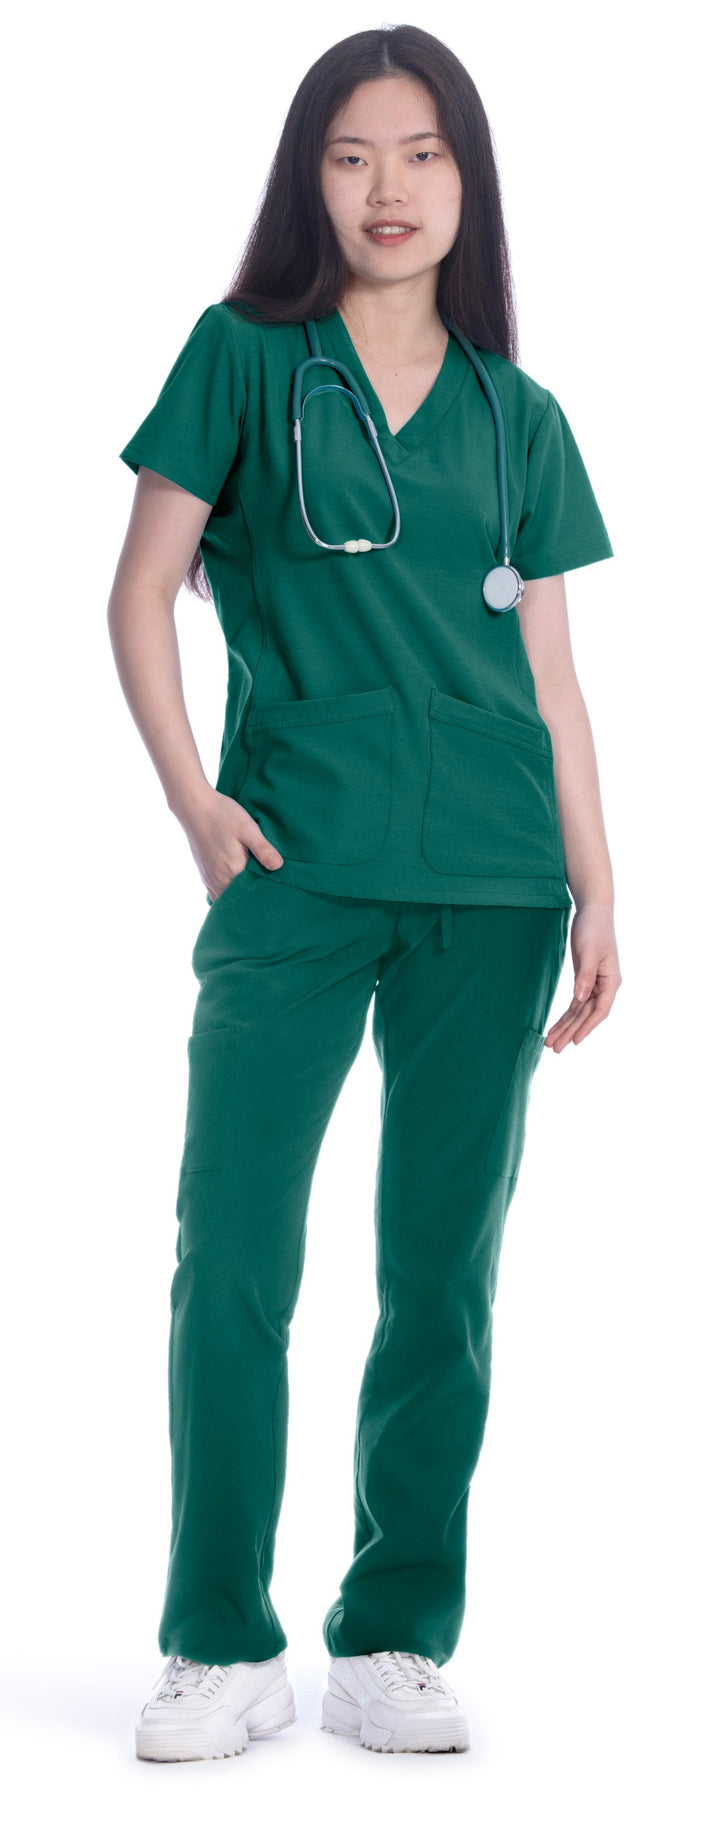 Style 1201 - 4-Way Stretch Scrub Top: The Ultimate in Comfort & Style